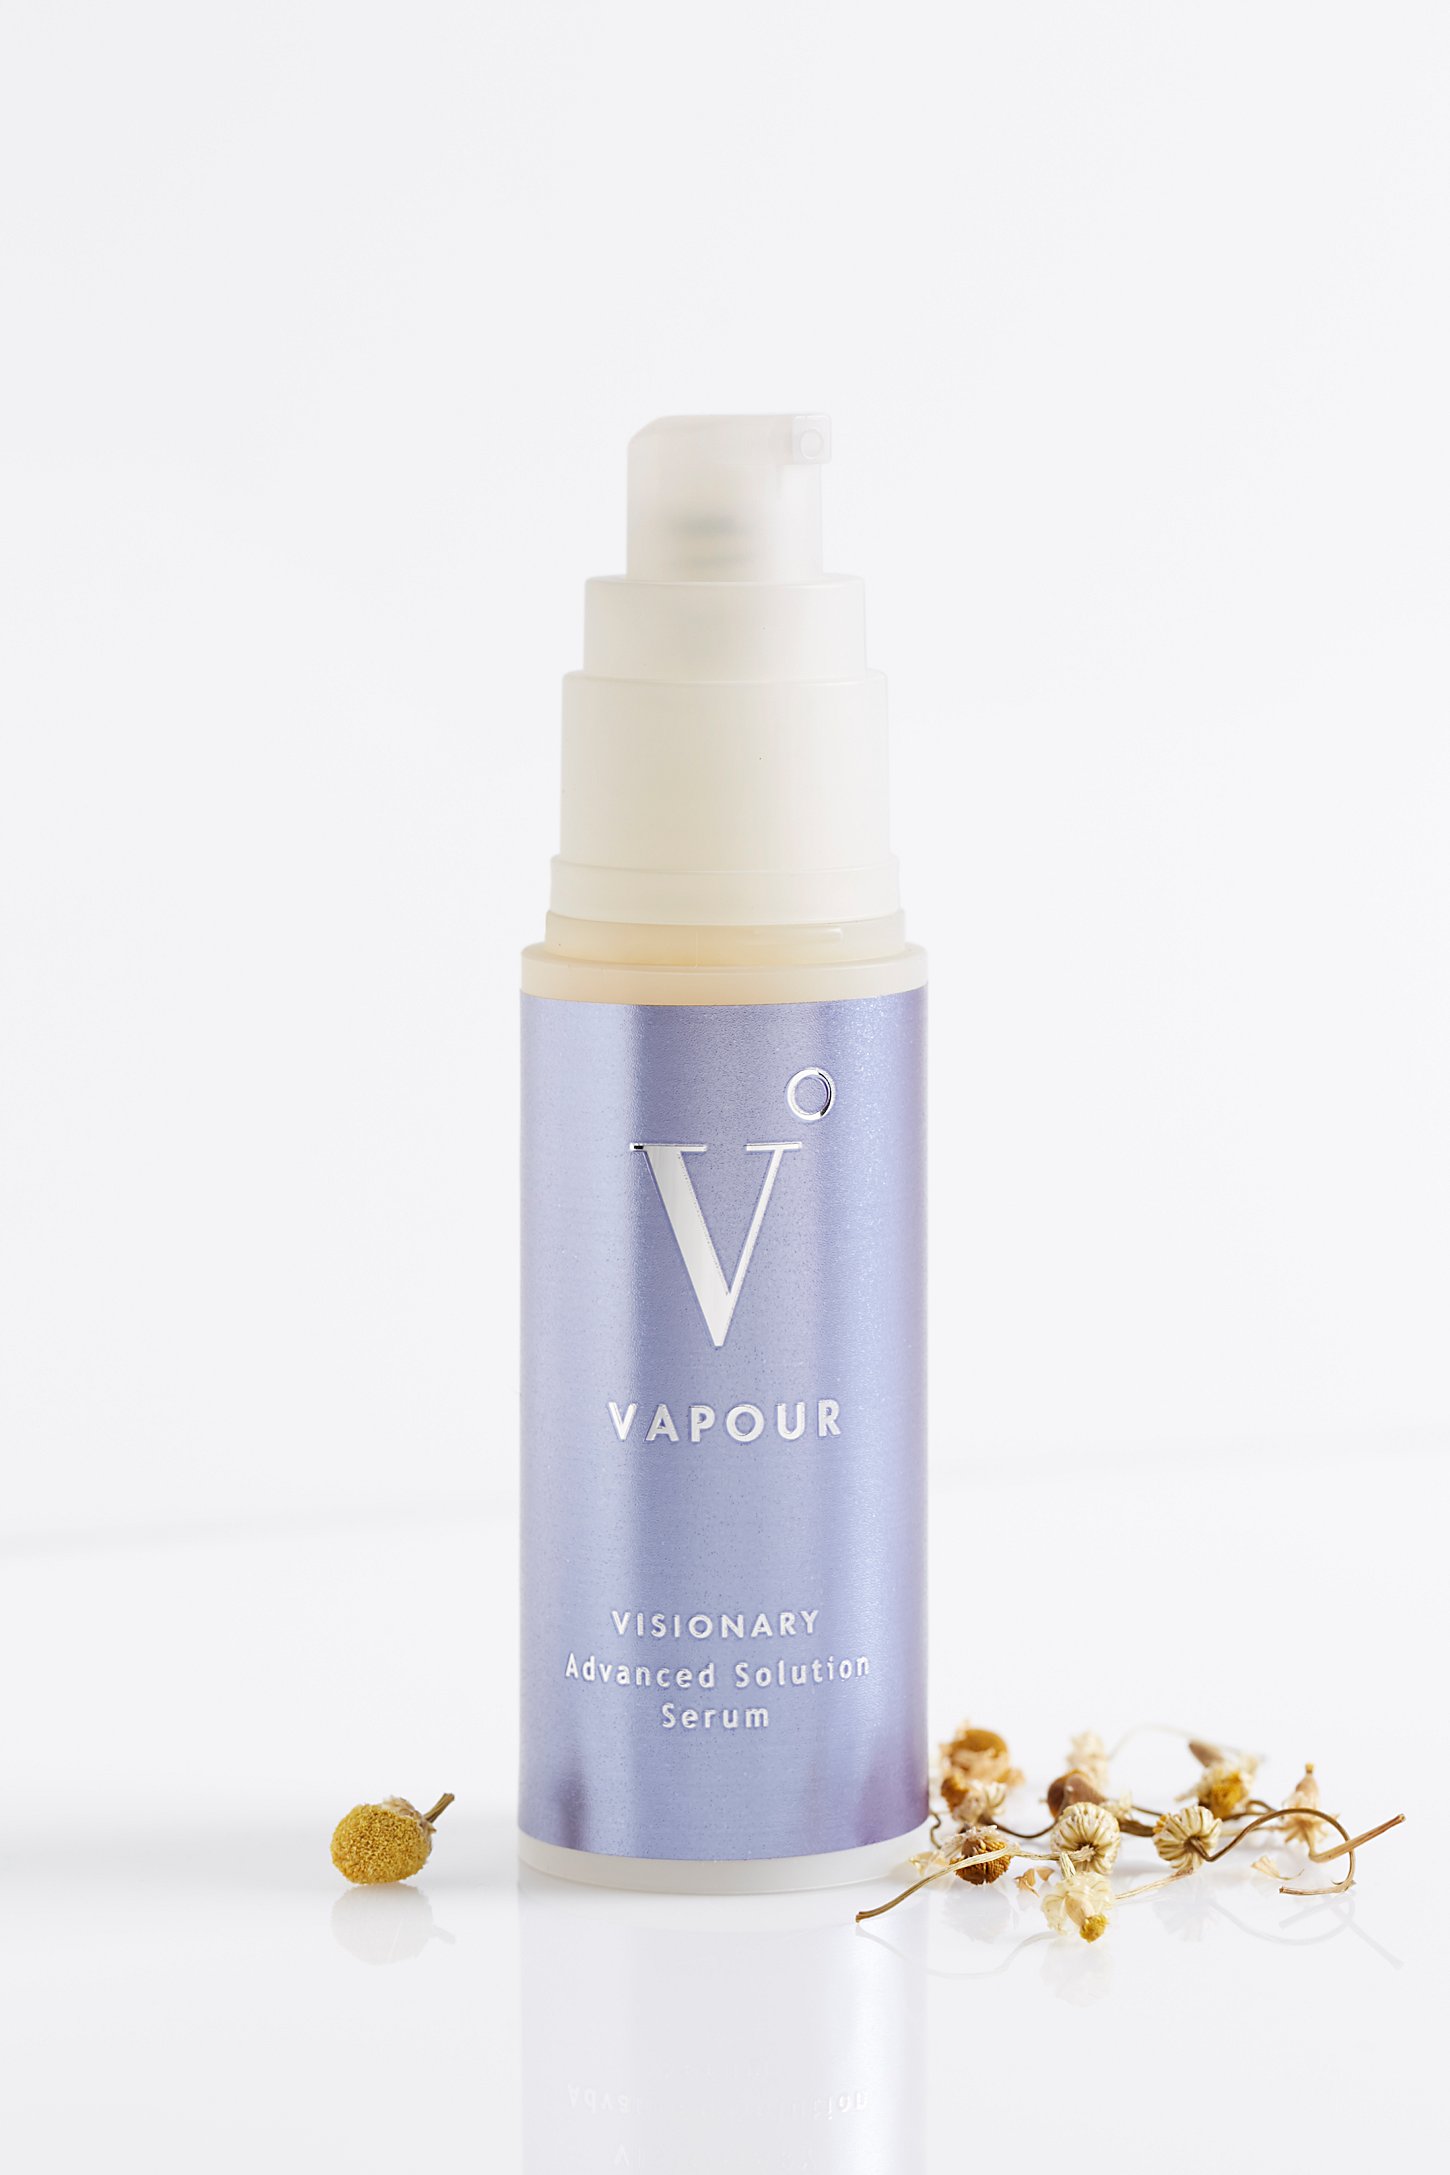 Vapour Advanced Solution Serum | Free People